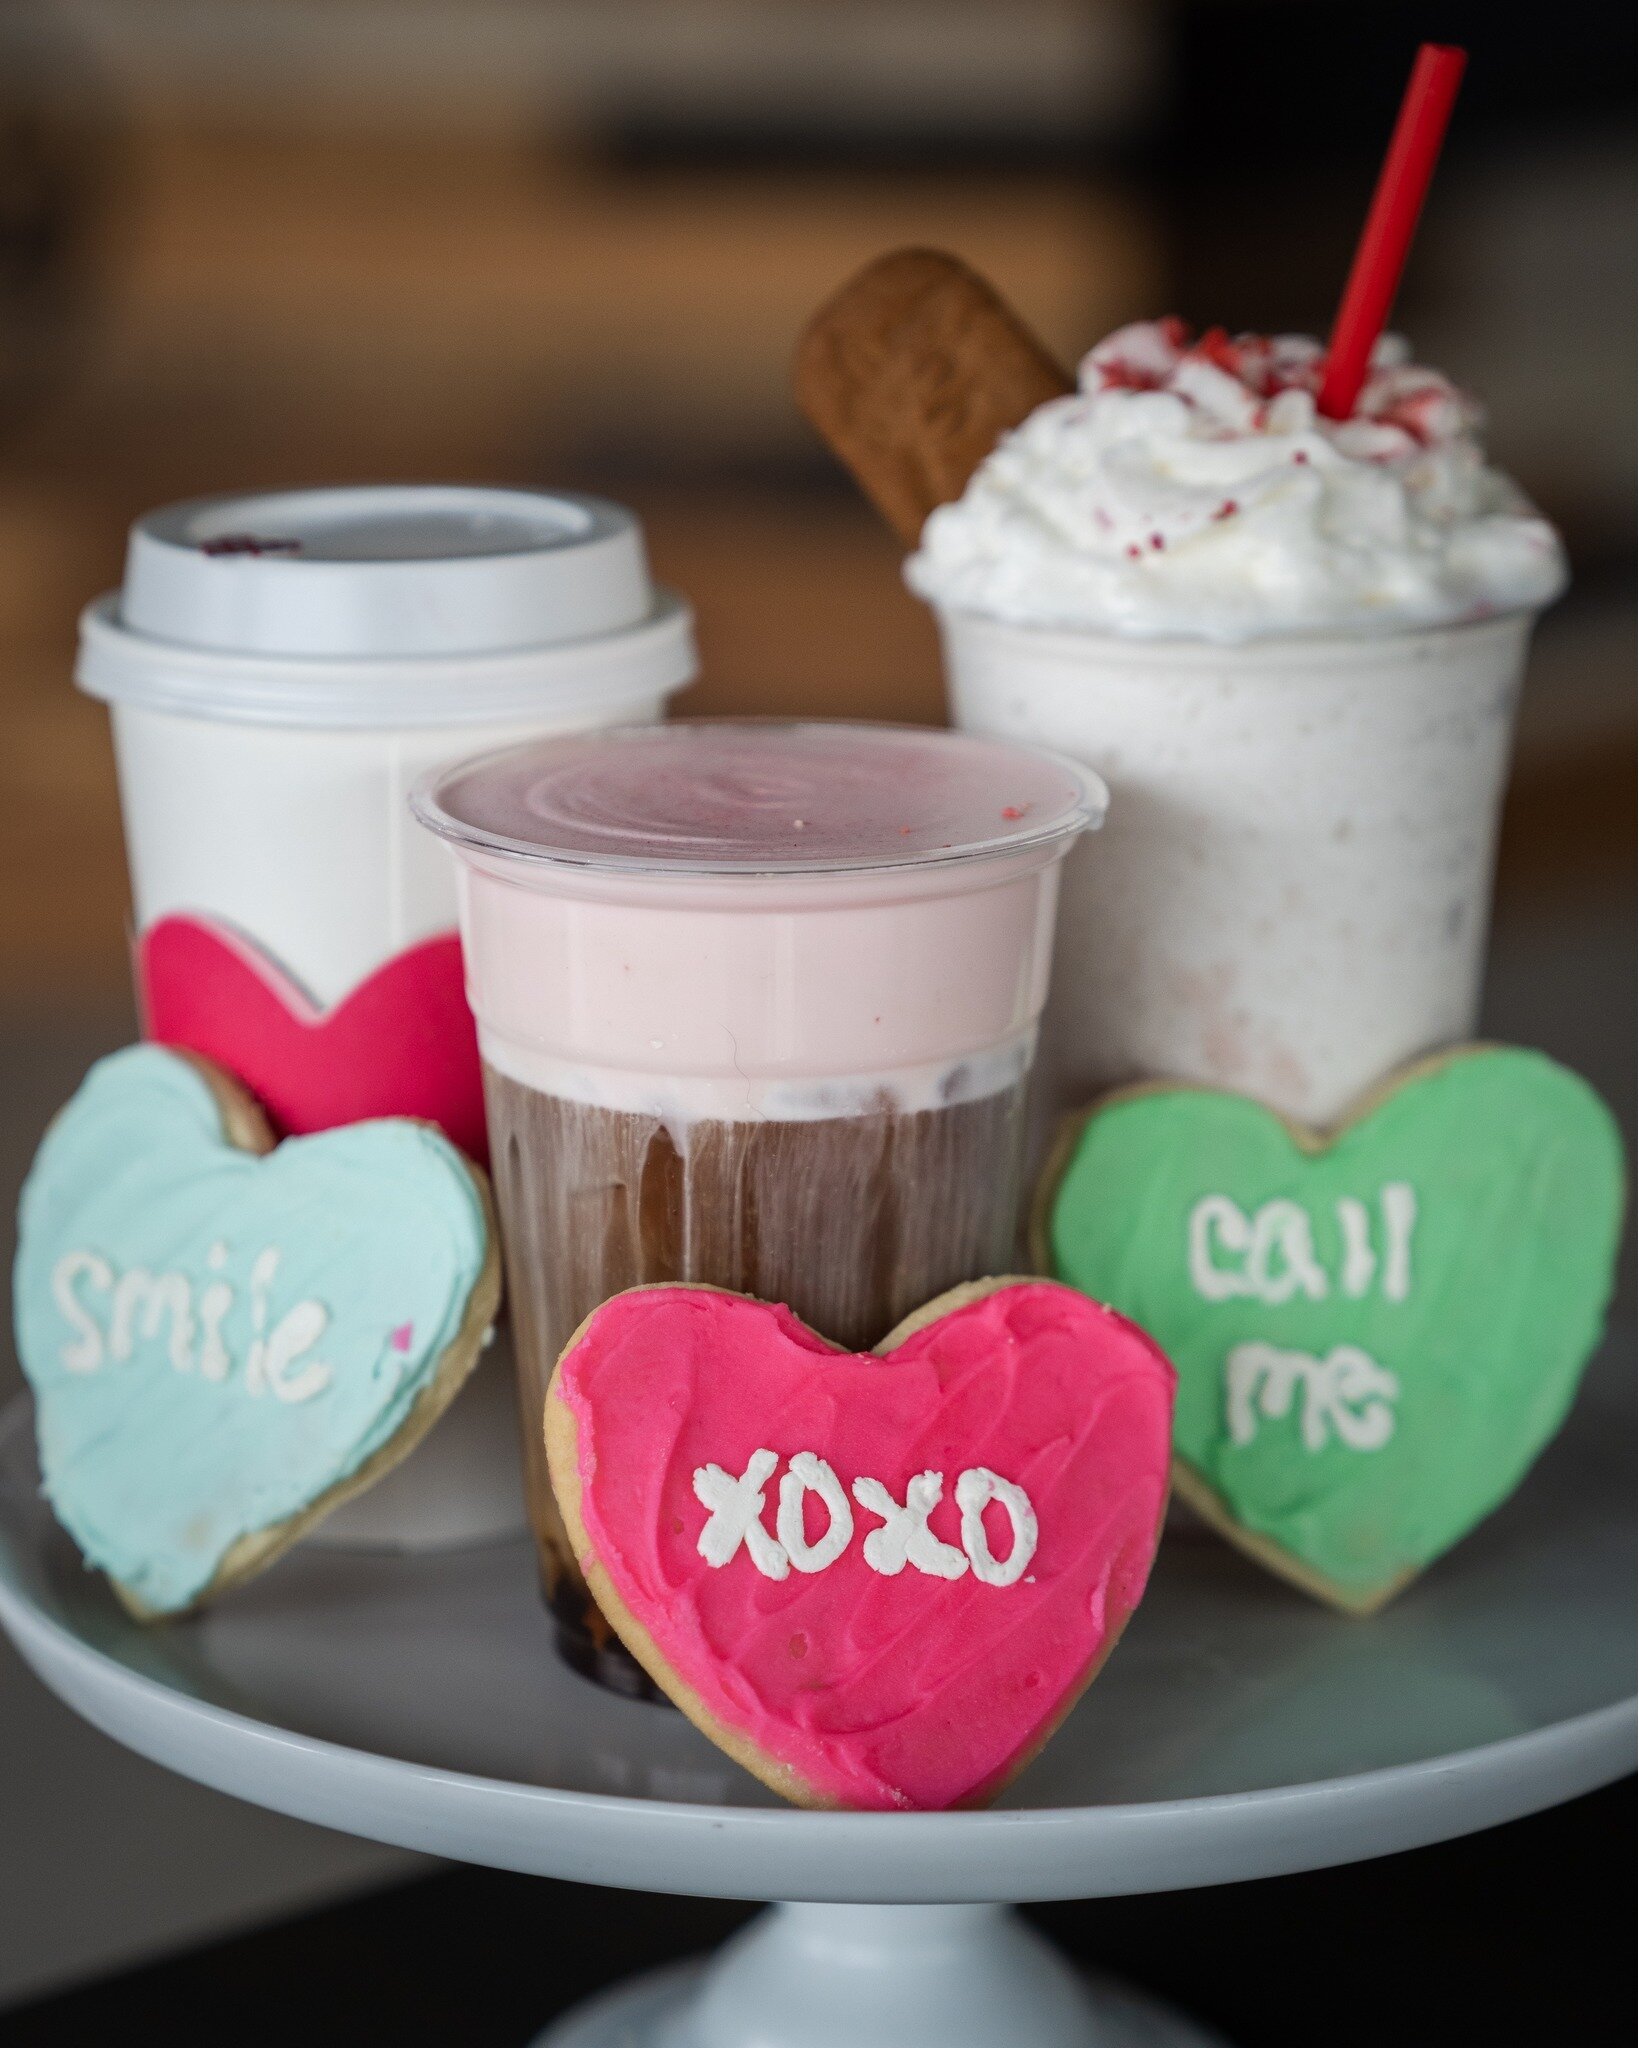 VALENTINES DRINK MENU! from left to right:

Raspberry Truffle (hot or iced), Lavender Vanilla Spice Cold Foam, and Strawberry Shortbread Cookie Frappe.

We love you ❤ ...you are our valentine!

____

&bull;

&bull;

#groundedcoffeeandcrumbs #supportl